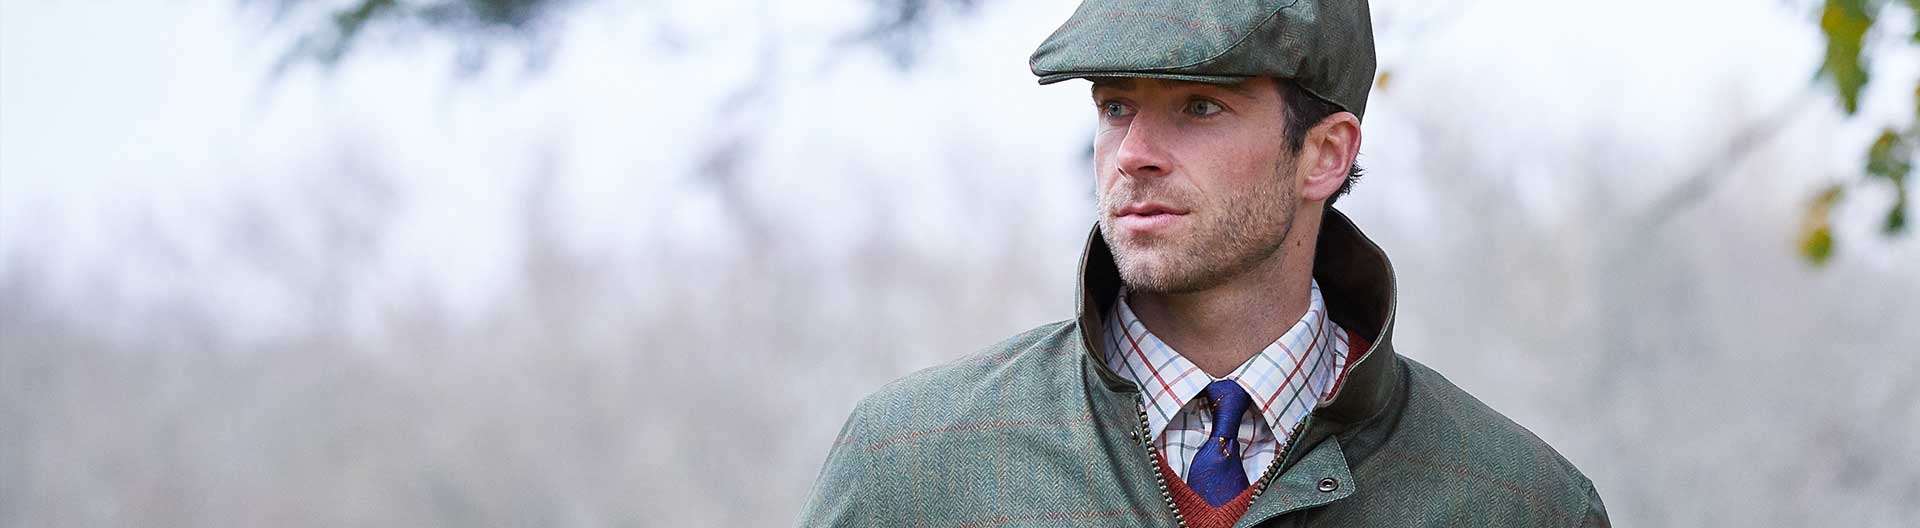 Man wearing Green flat cap and waterproof jacket over a tattersall shirt a blue tie. With blurred grey sky background.